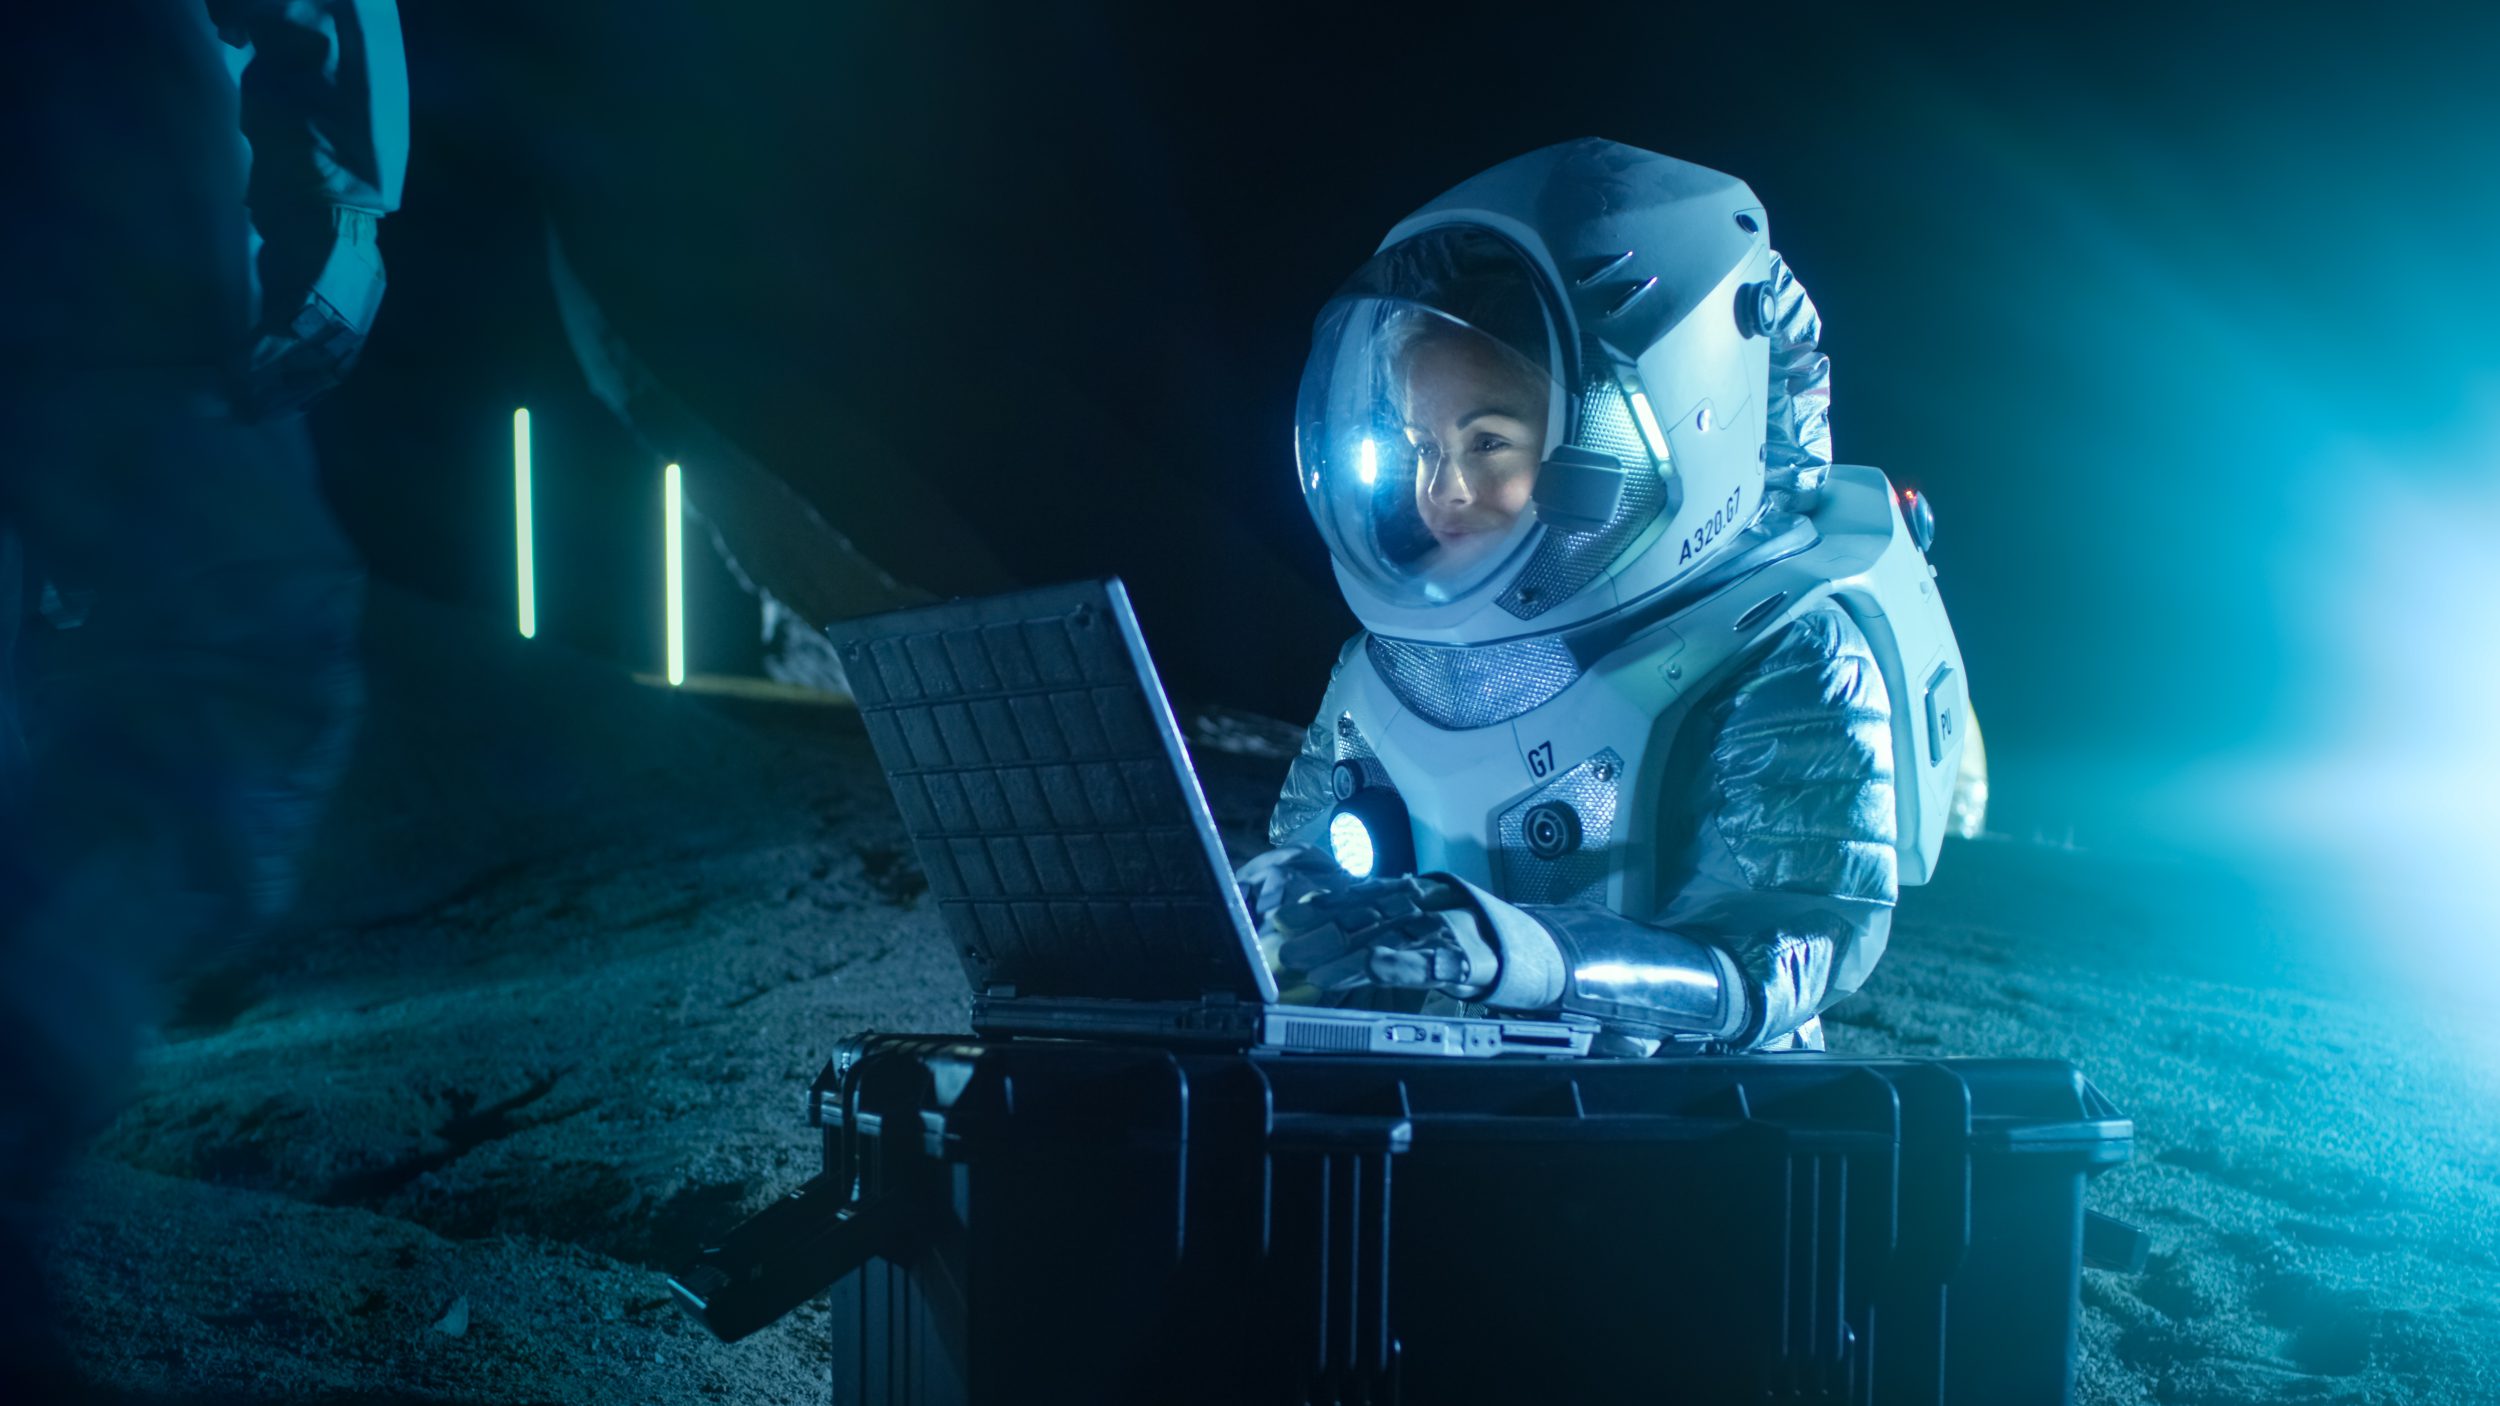 Computers in Space with Female Astronaut Wearing Space Suit Works on a Laptop, Exploring Newly Discovered Planet, Communicating with the Earth. In the Background Her Crew Member and Space Habitat.